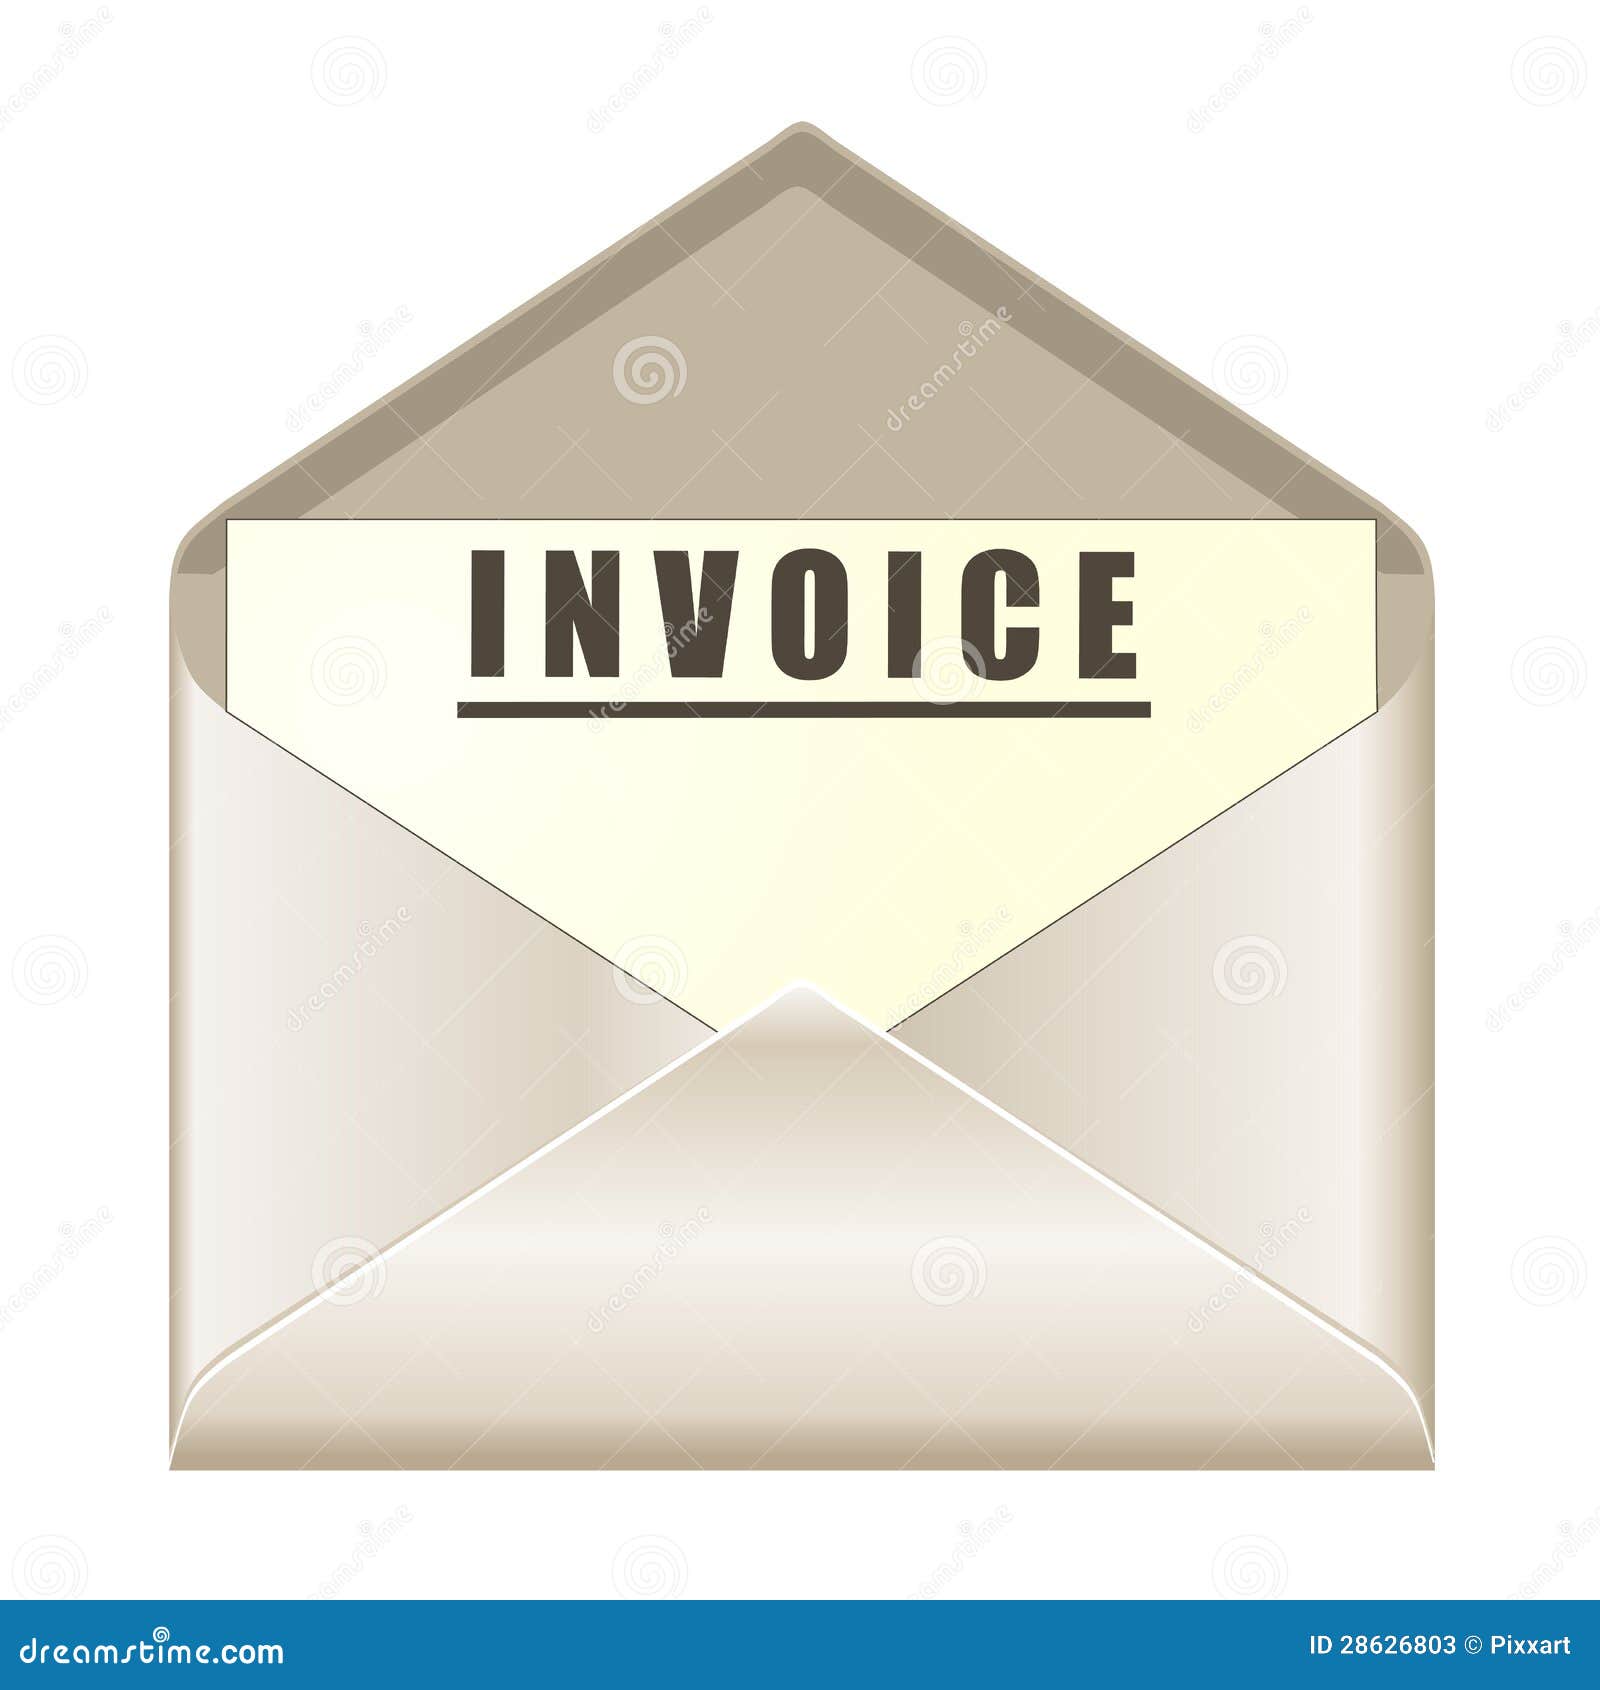 Envelope With Invoice Document Stock Vector - Illustration of cover ...